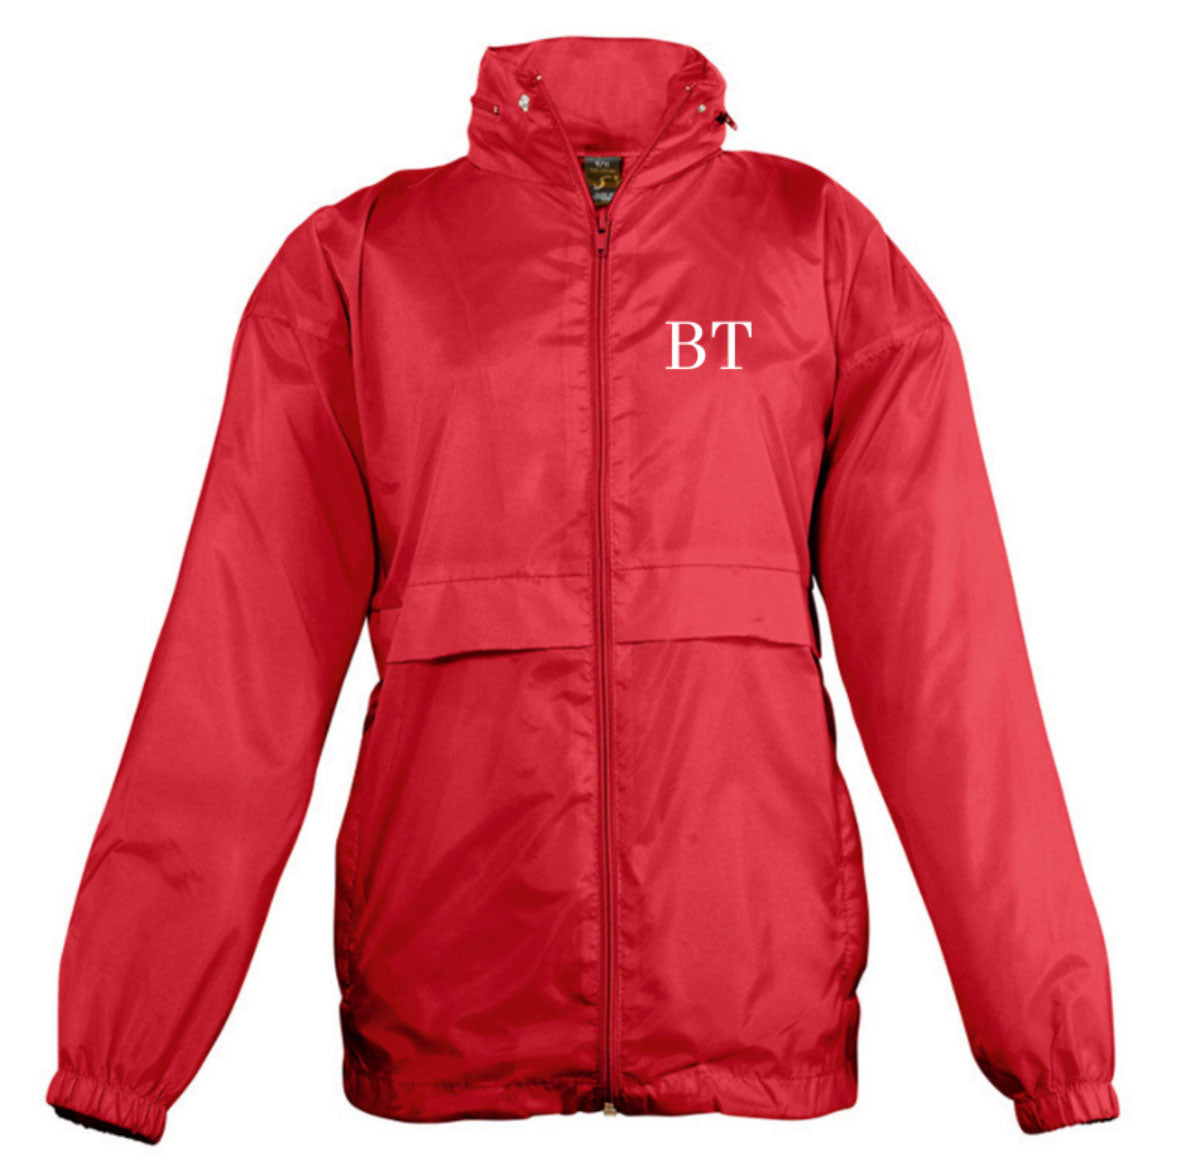 Embroidered Red Windbreaker Jacket